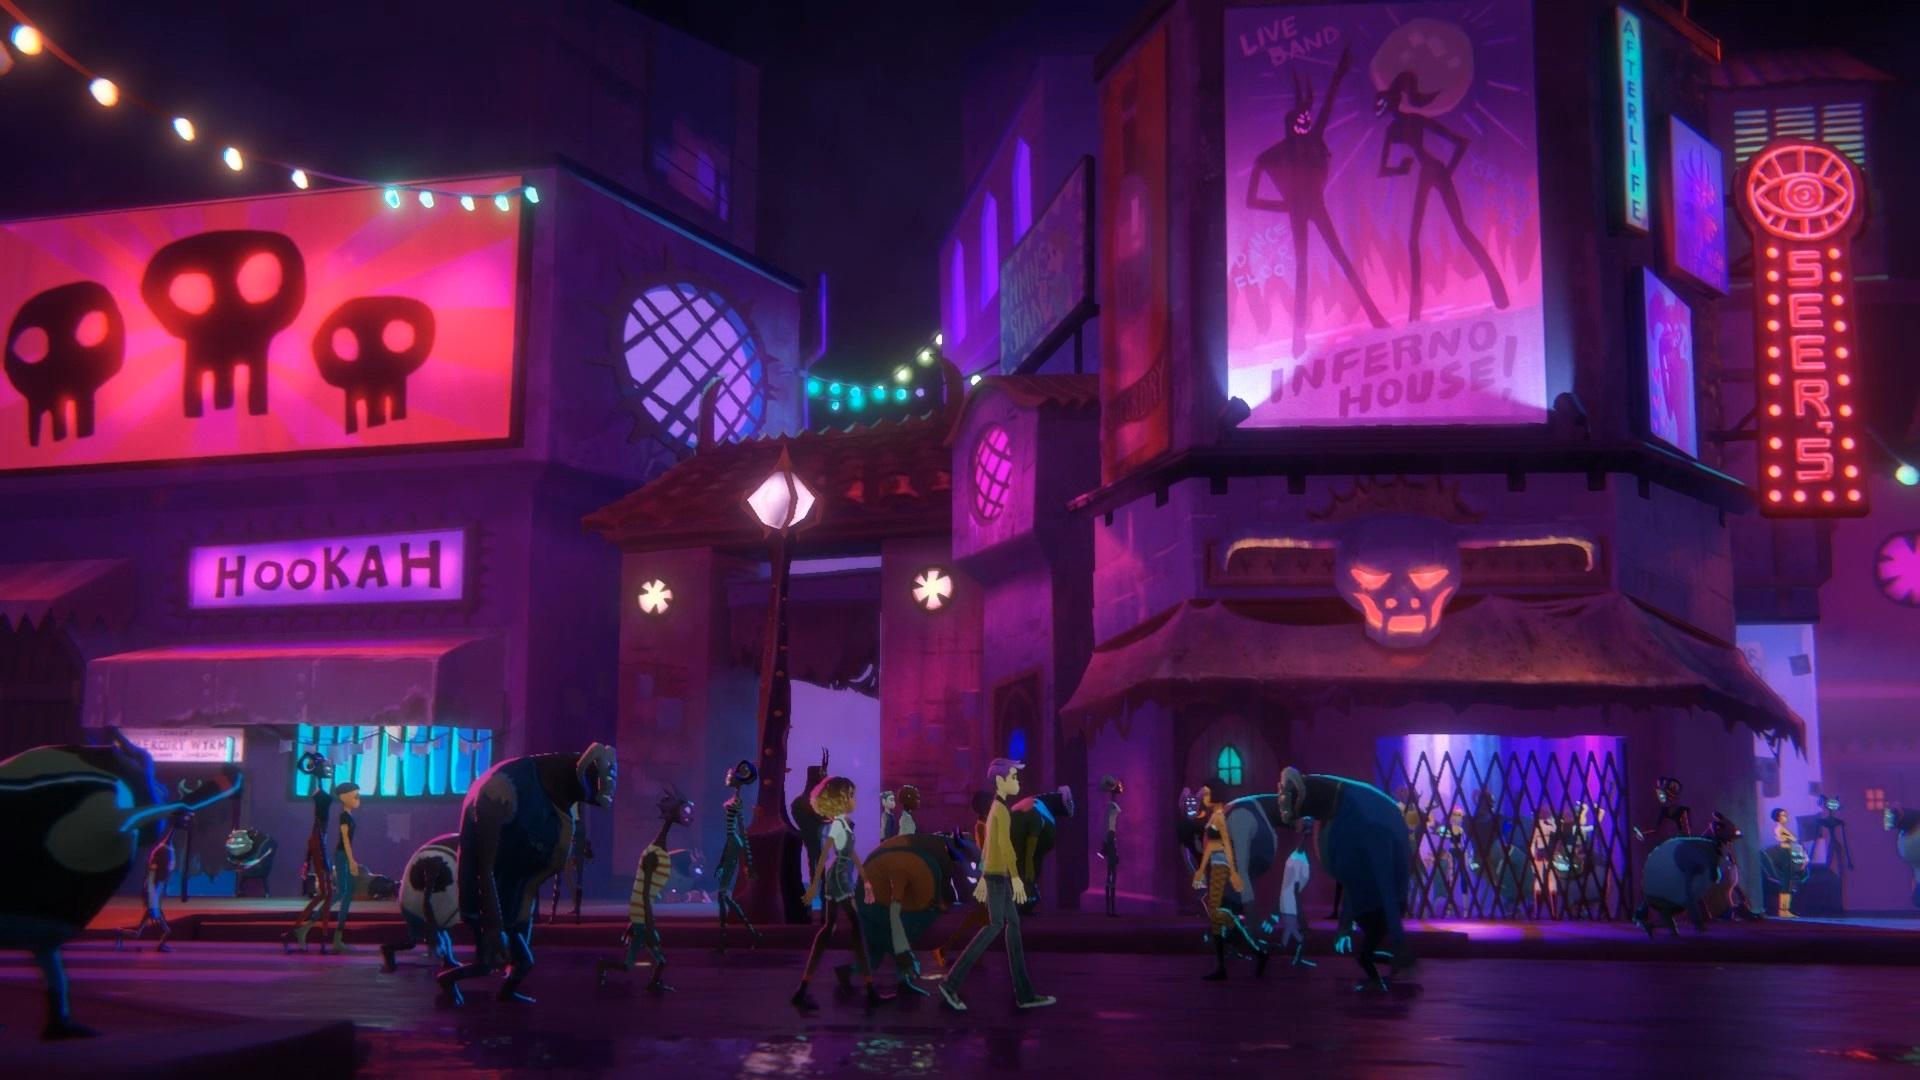 Oxenfree dev's next game Afterparty confirmed for Switch